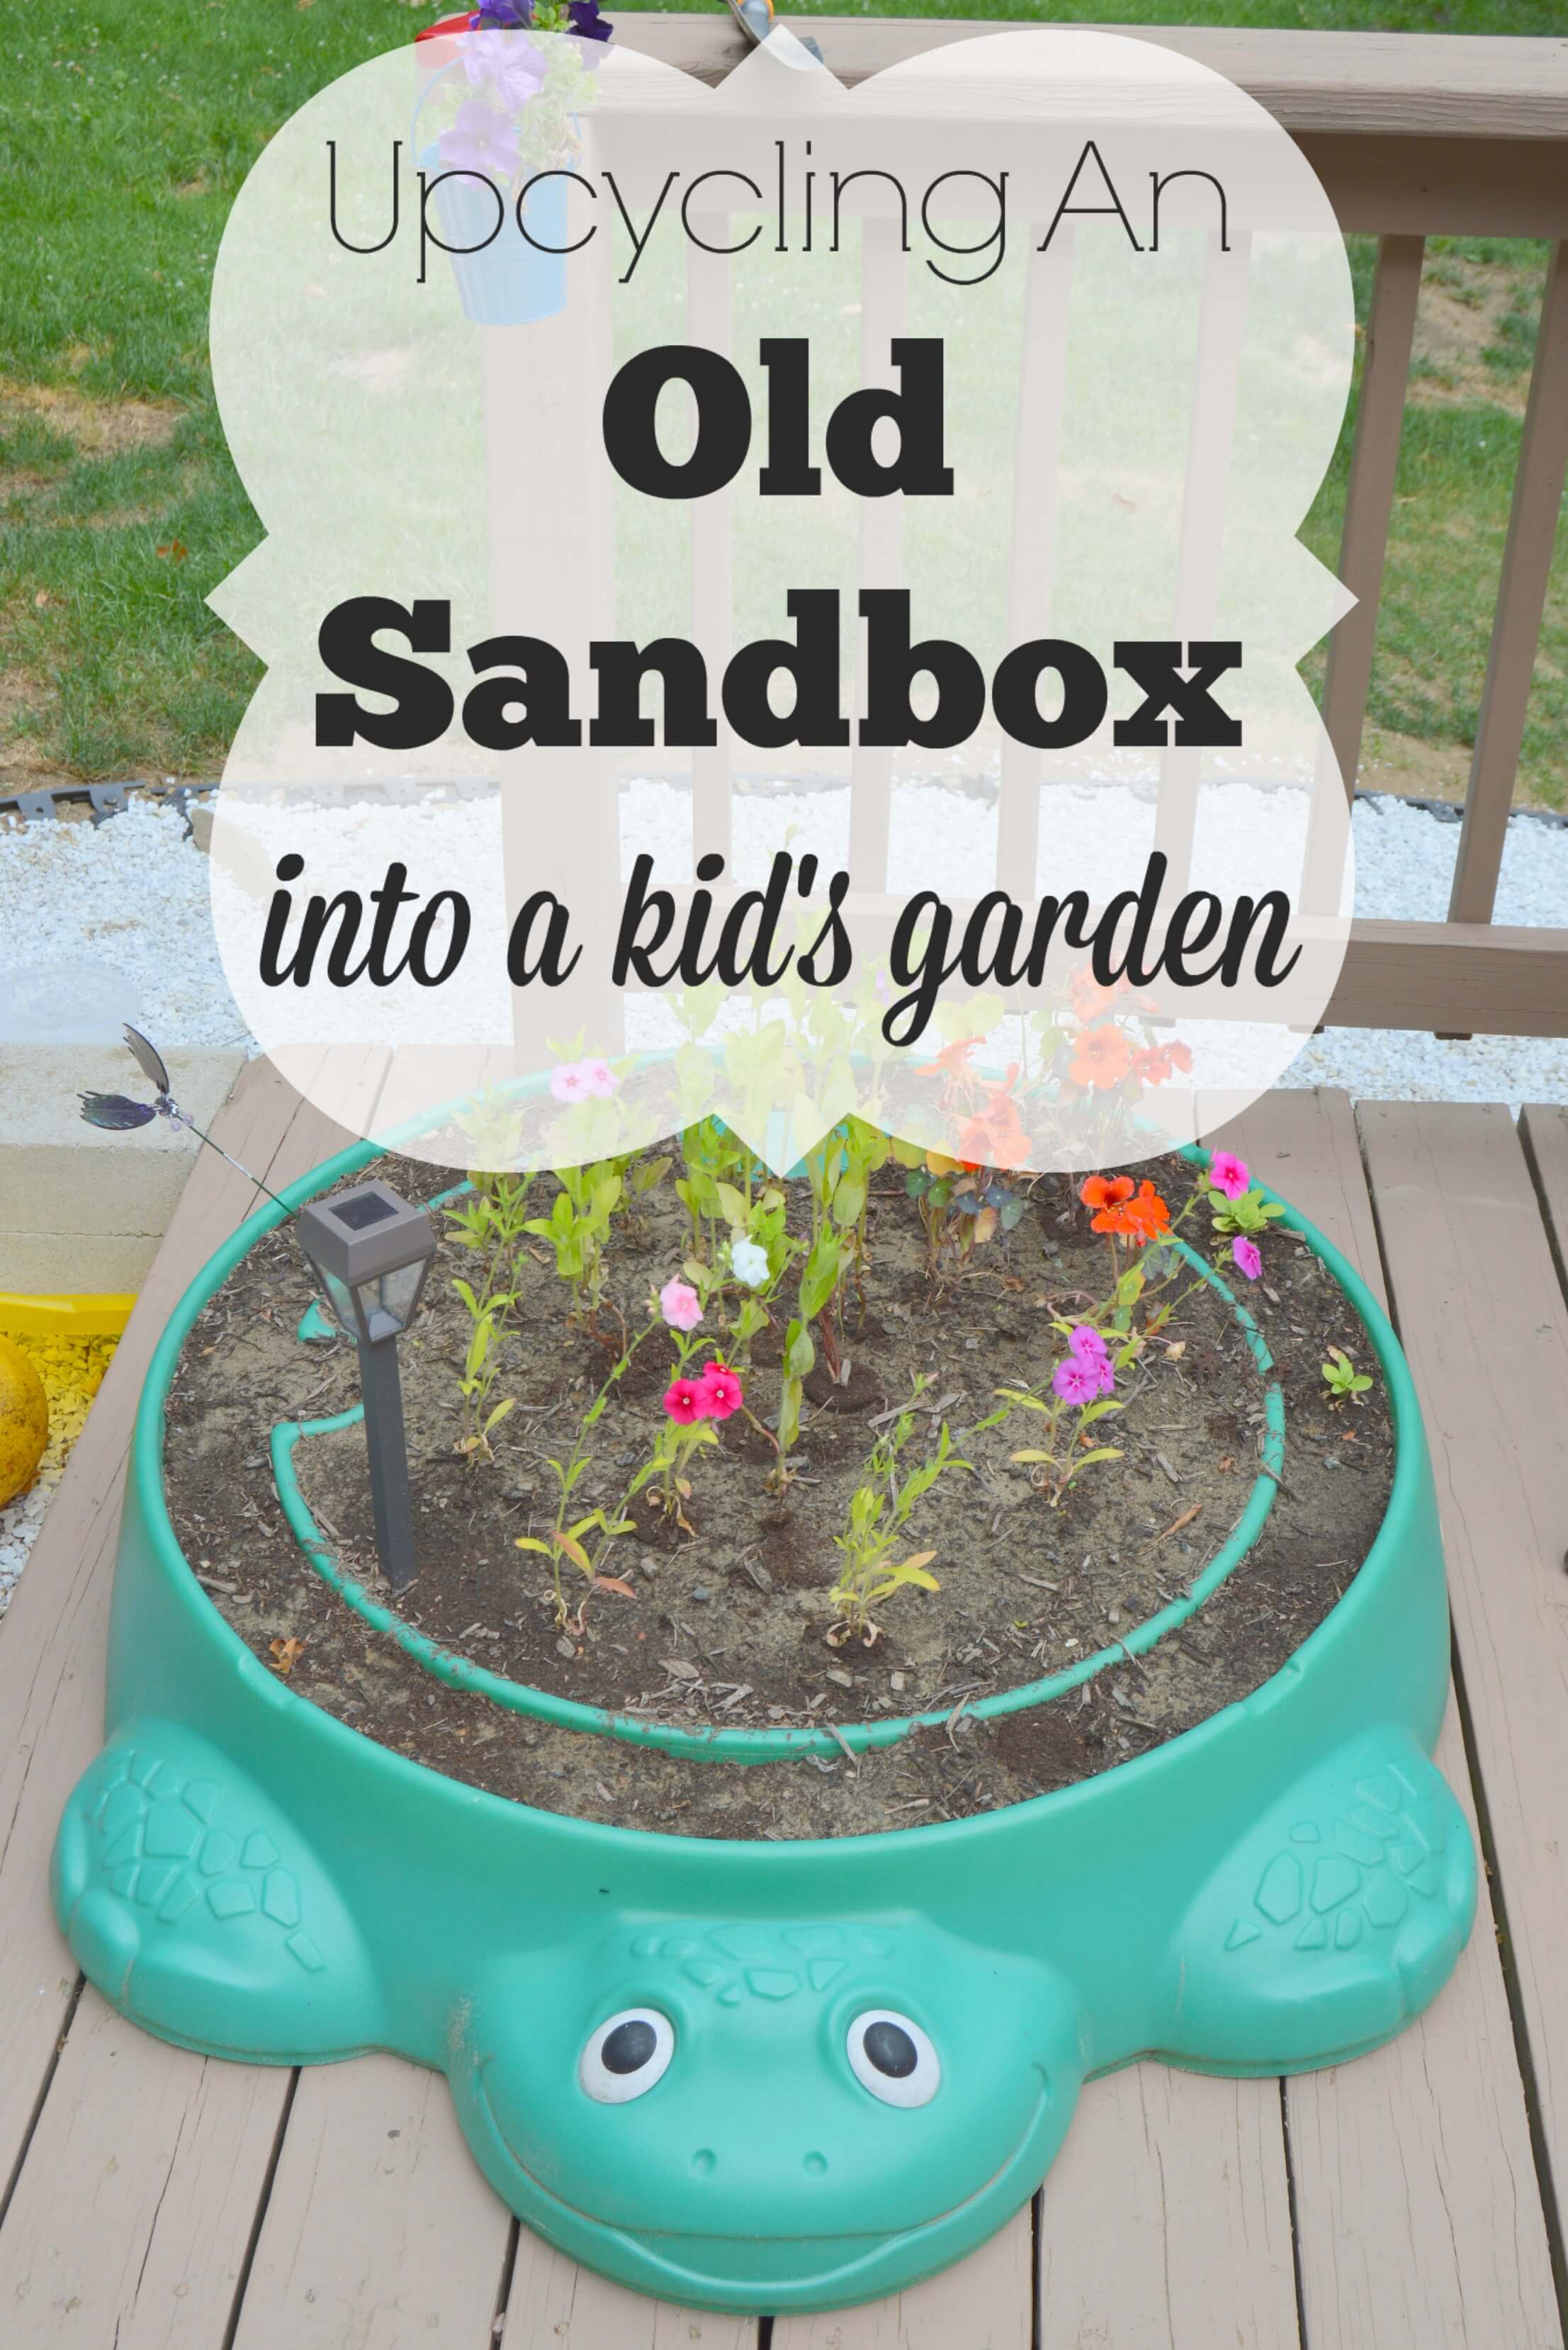 Do you have an old plastic sandbox lying around that your kids have outgrown? Don't toss it. Upcycle it into an adorable kid's garden!